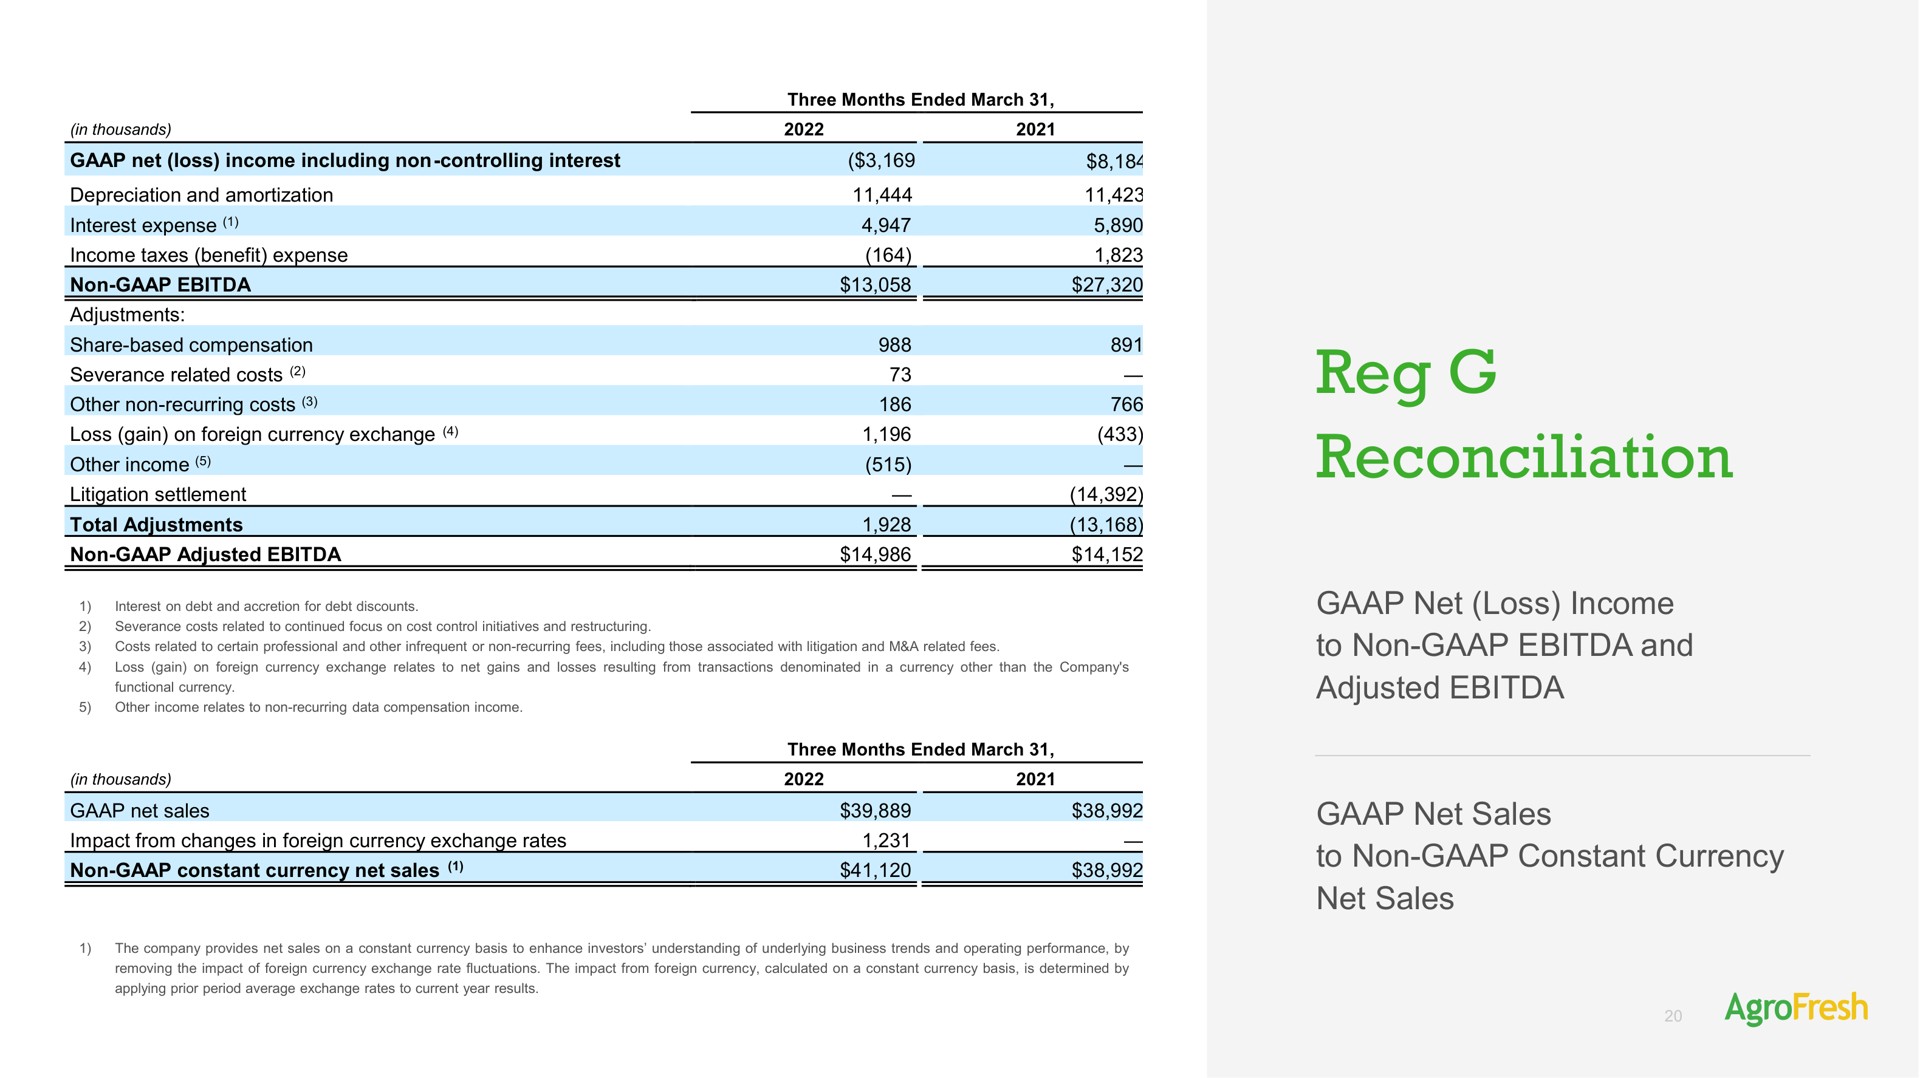 reg reconciliation other income a | AgroFresh